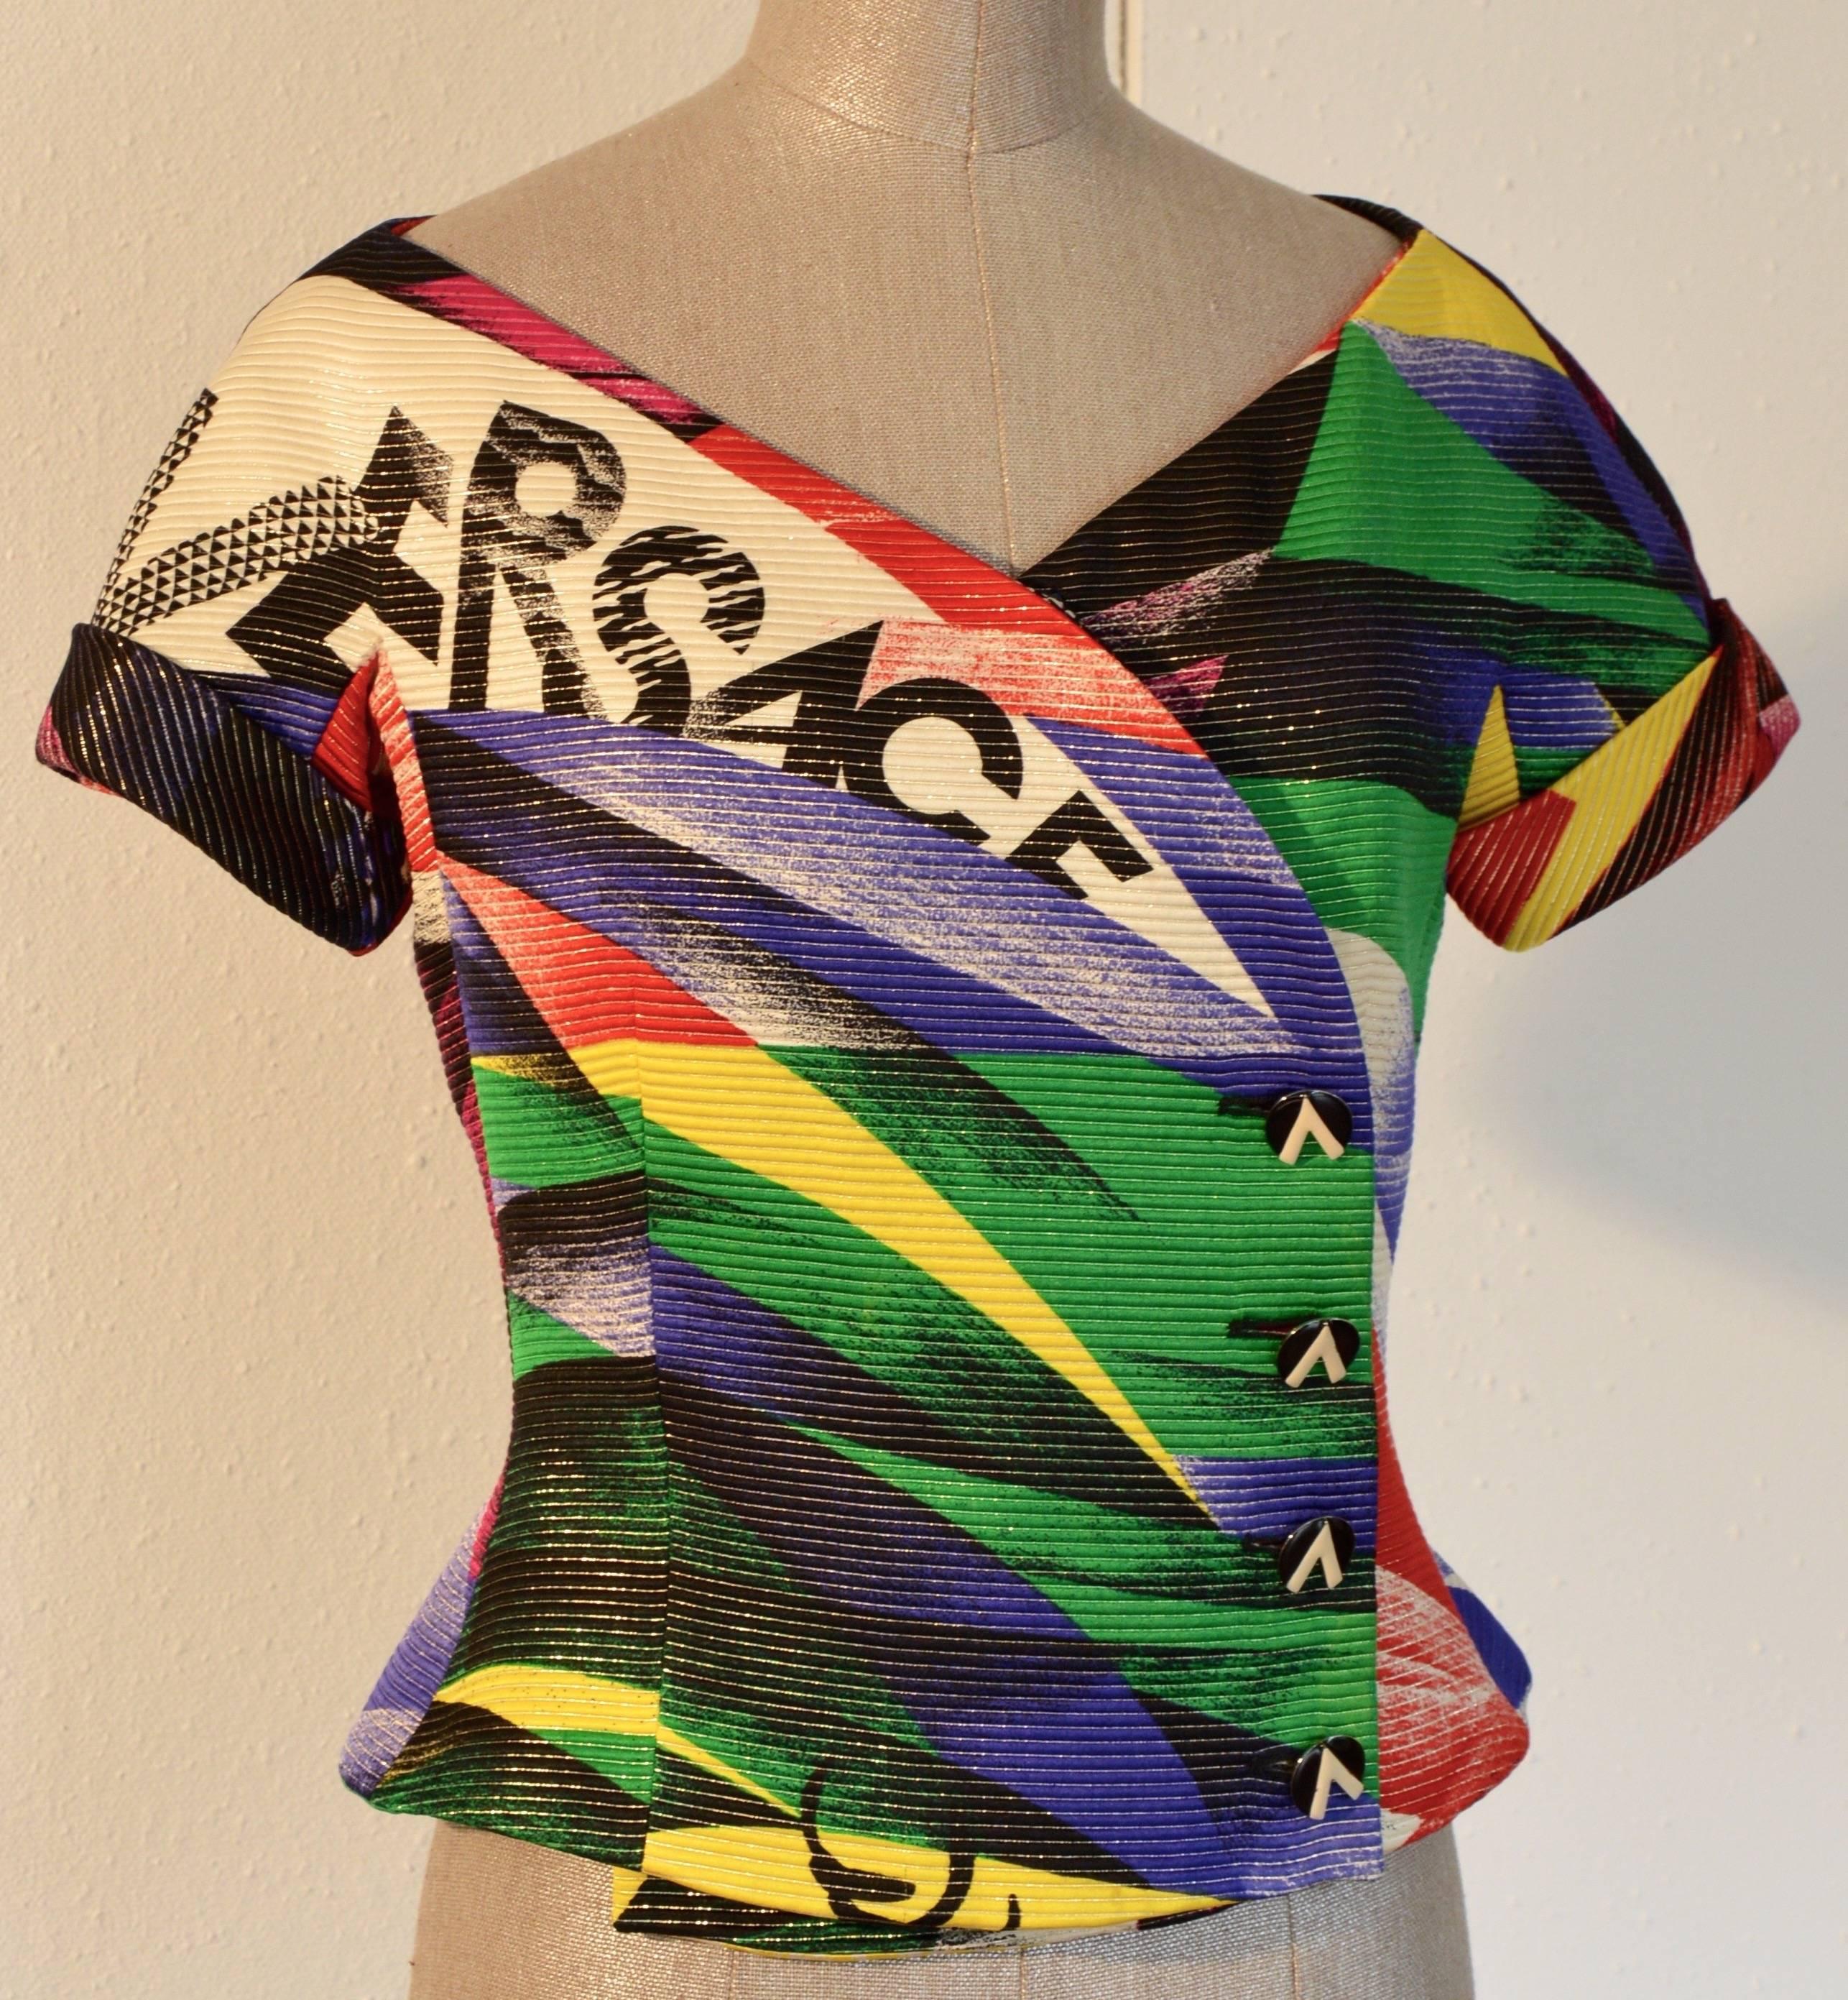 Black 1991 Gianni Versace Graffiti Colorful Skirt Suit Inspired by Chagall's Works